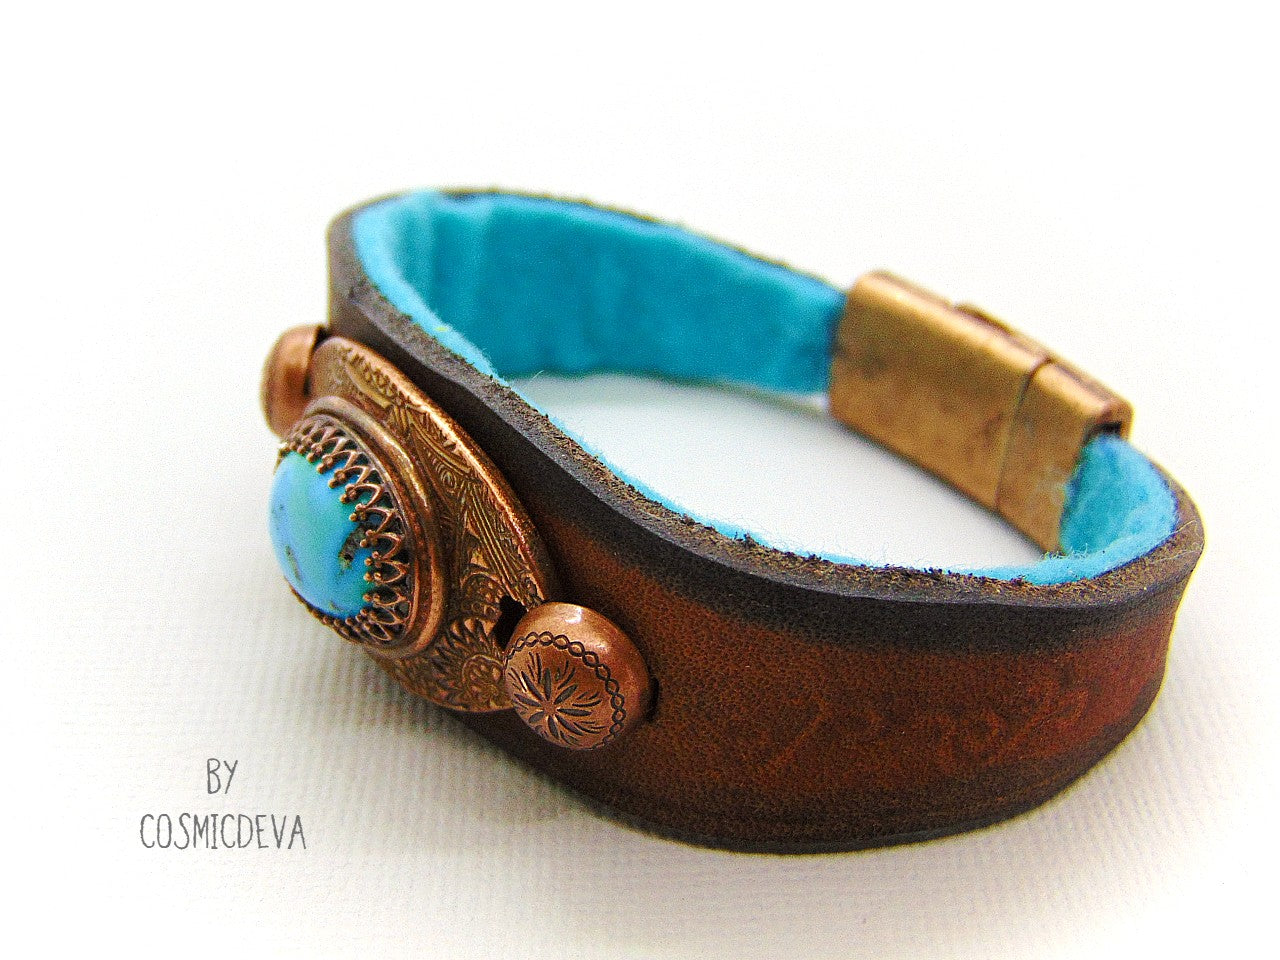 Beautiful one of a kind handcrafted southwestern leather bracelet made of earthy mid-western style brown dyed veg tan leather. The focal point is a natural stabilized Tibet turquoise with a bezel setting in solid copper.